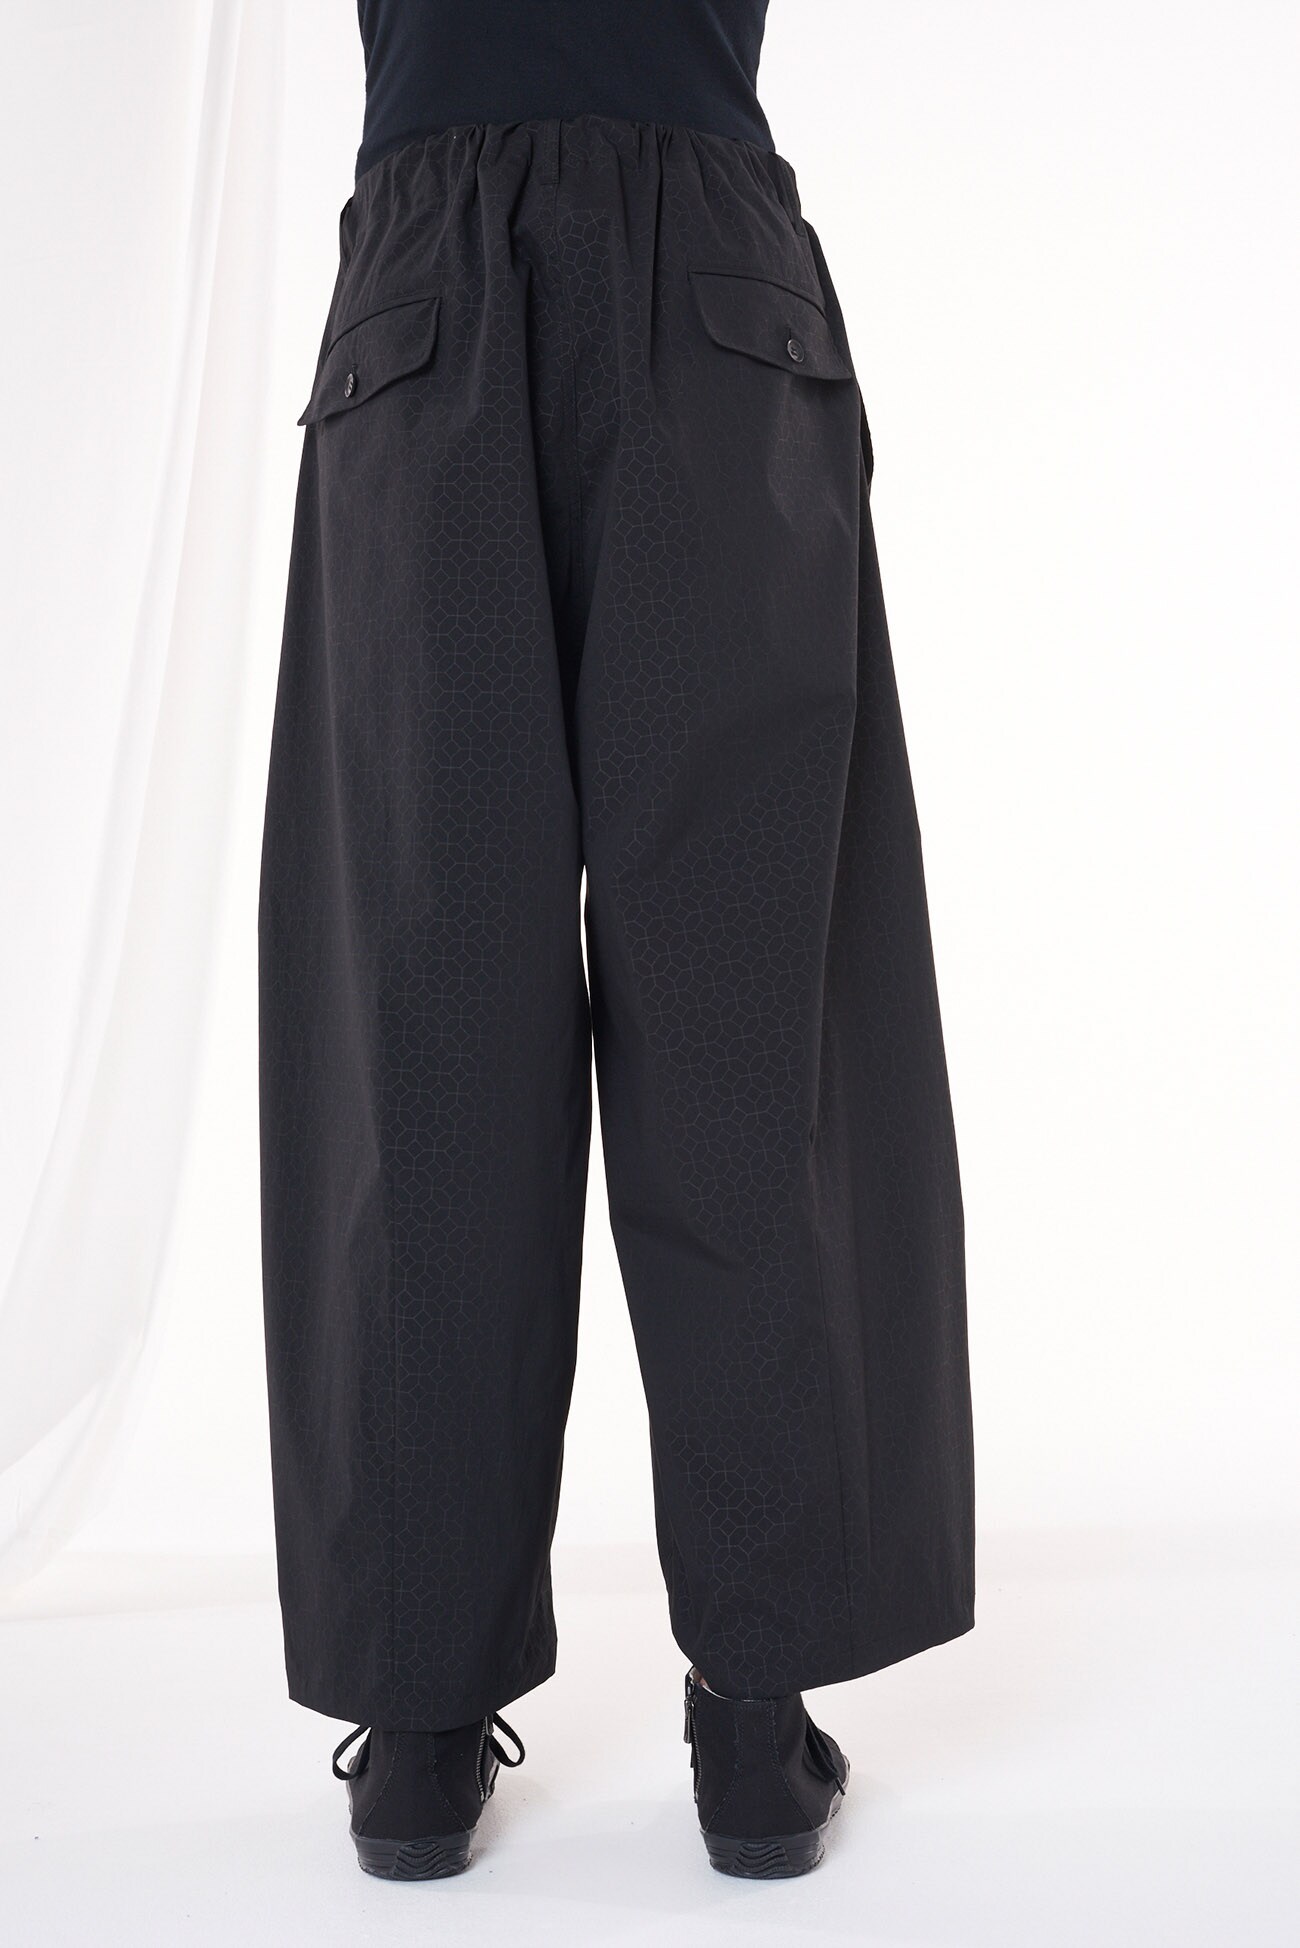 GEOMETRIC PATTERN PANTS WITH PROTRUDING KNEES